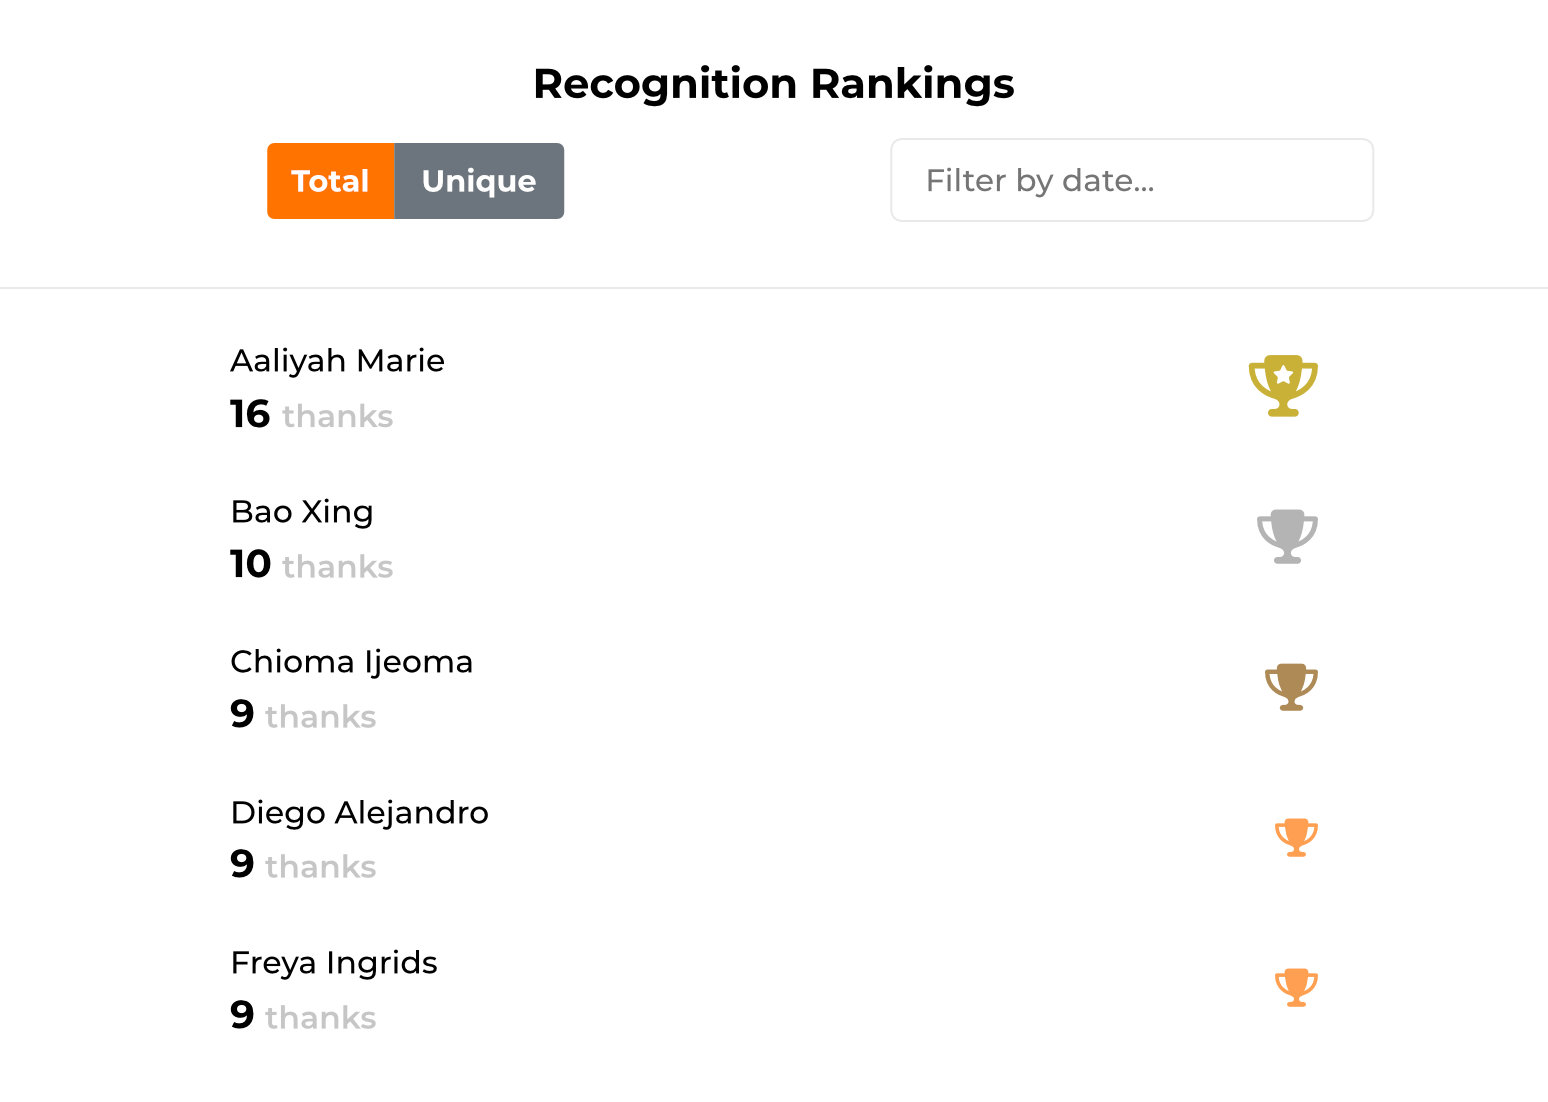 Recognition Ranking